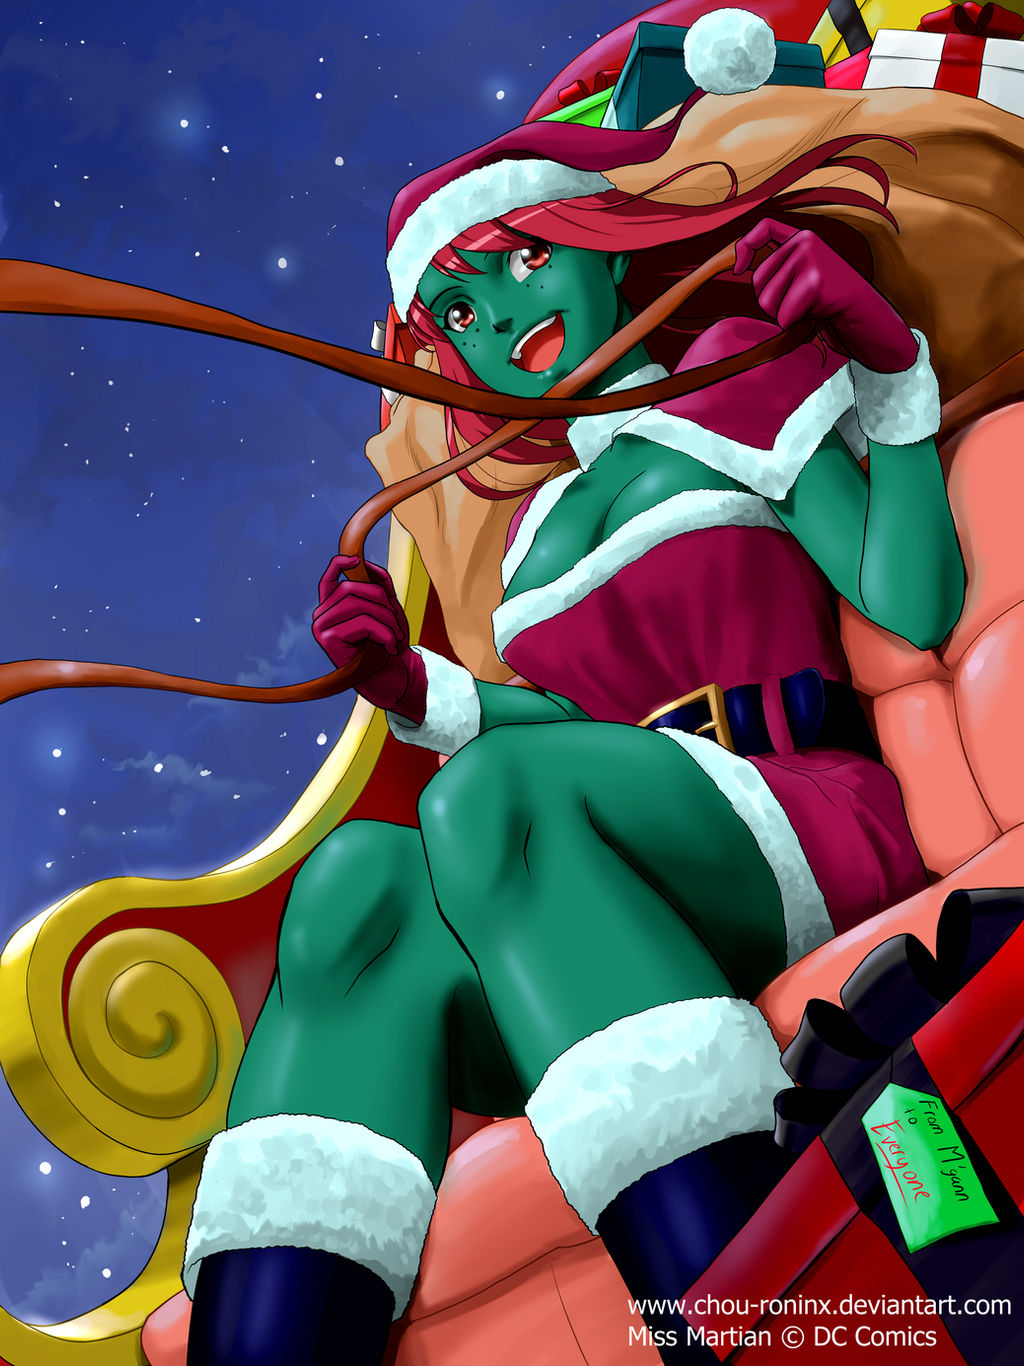 Merry X-mas from Ms Martian